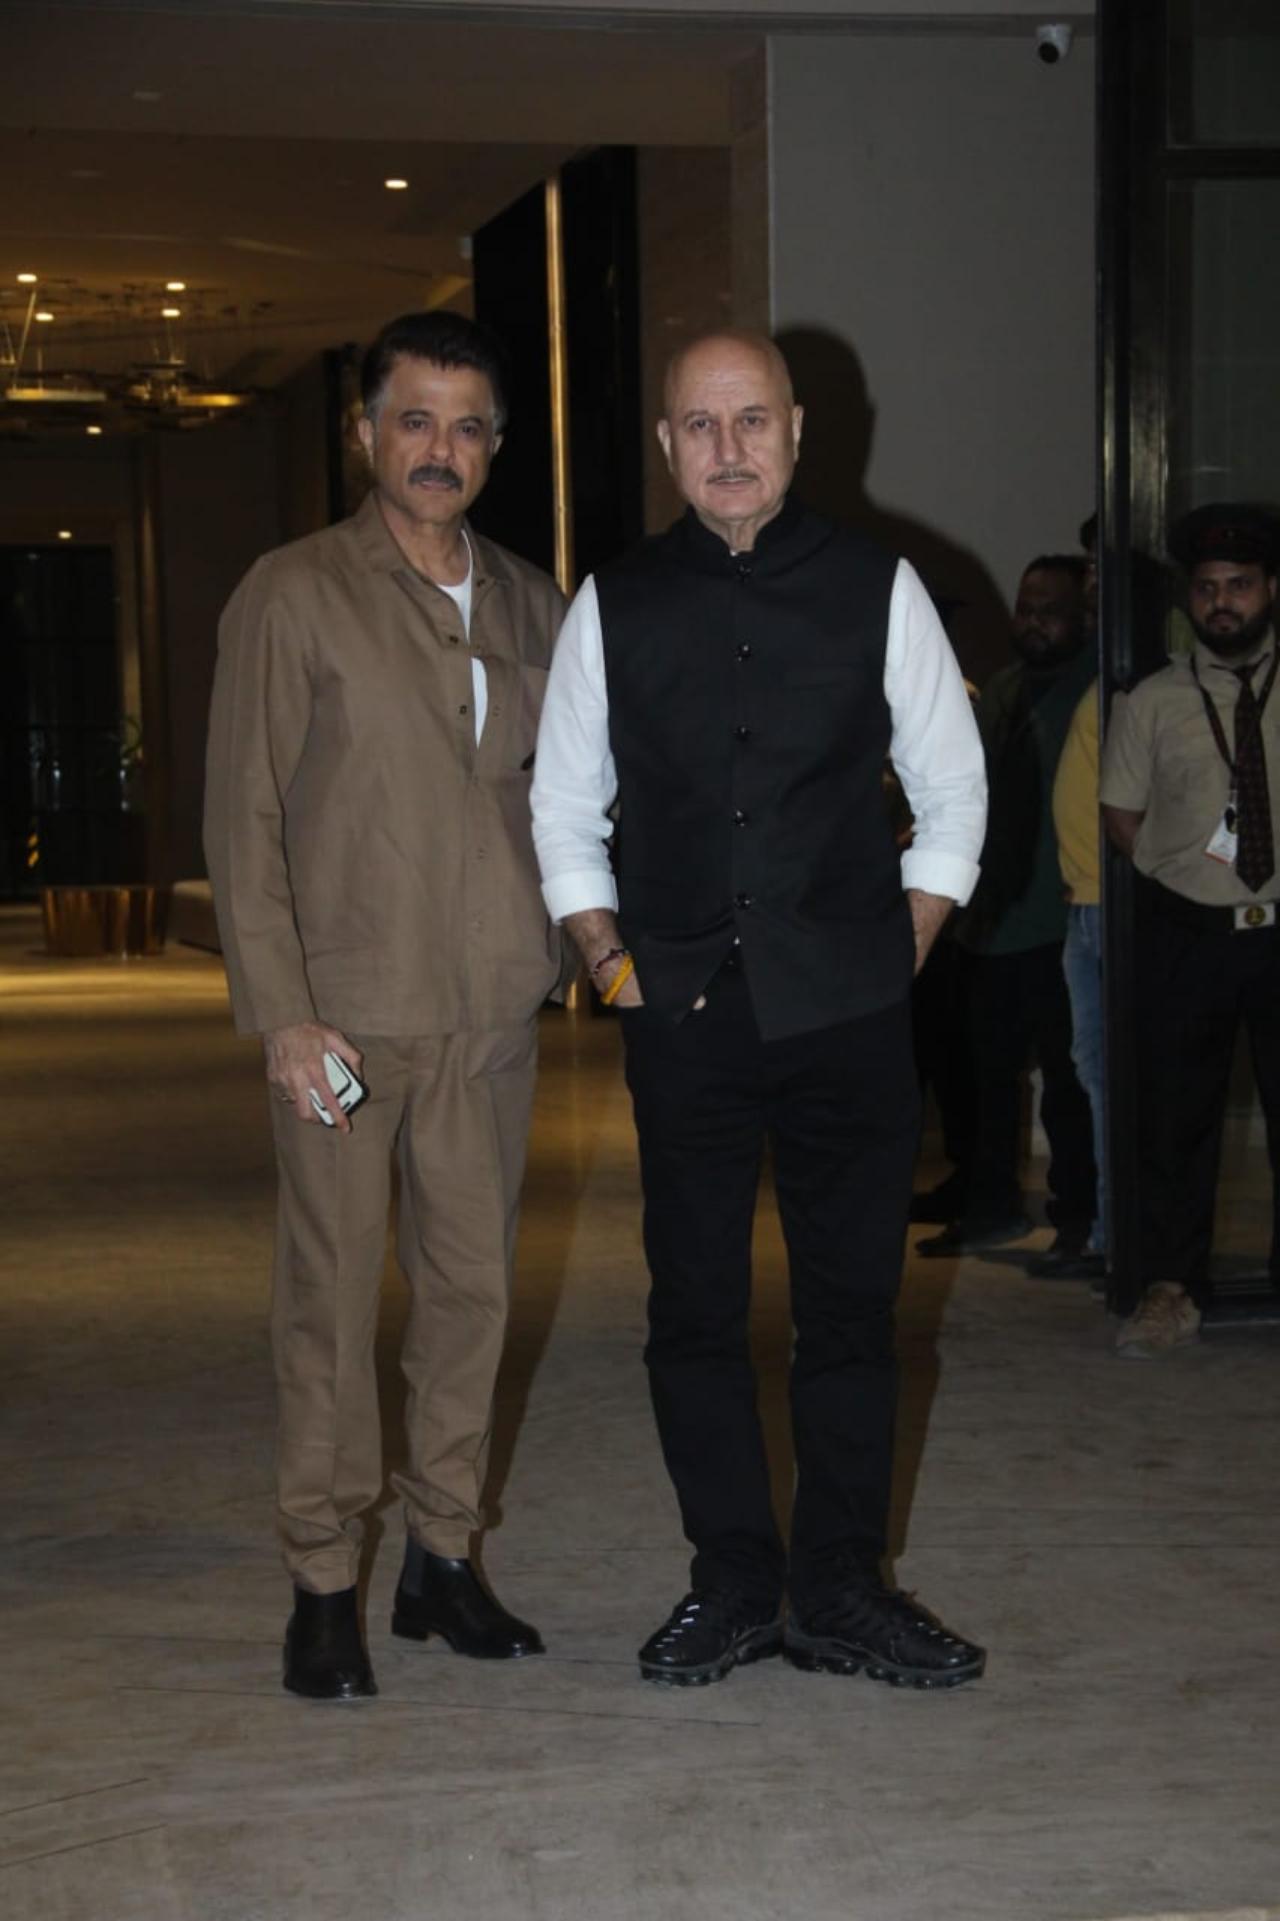 Anil Kapoor was seen dressed in a brown shirt and matching pants. He was accompanied by his close friend and actor Anupam Kher, who opted for a black and white outfit